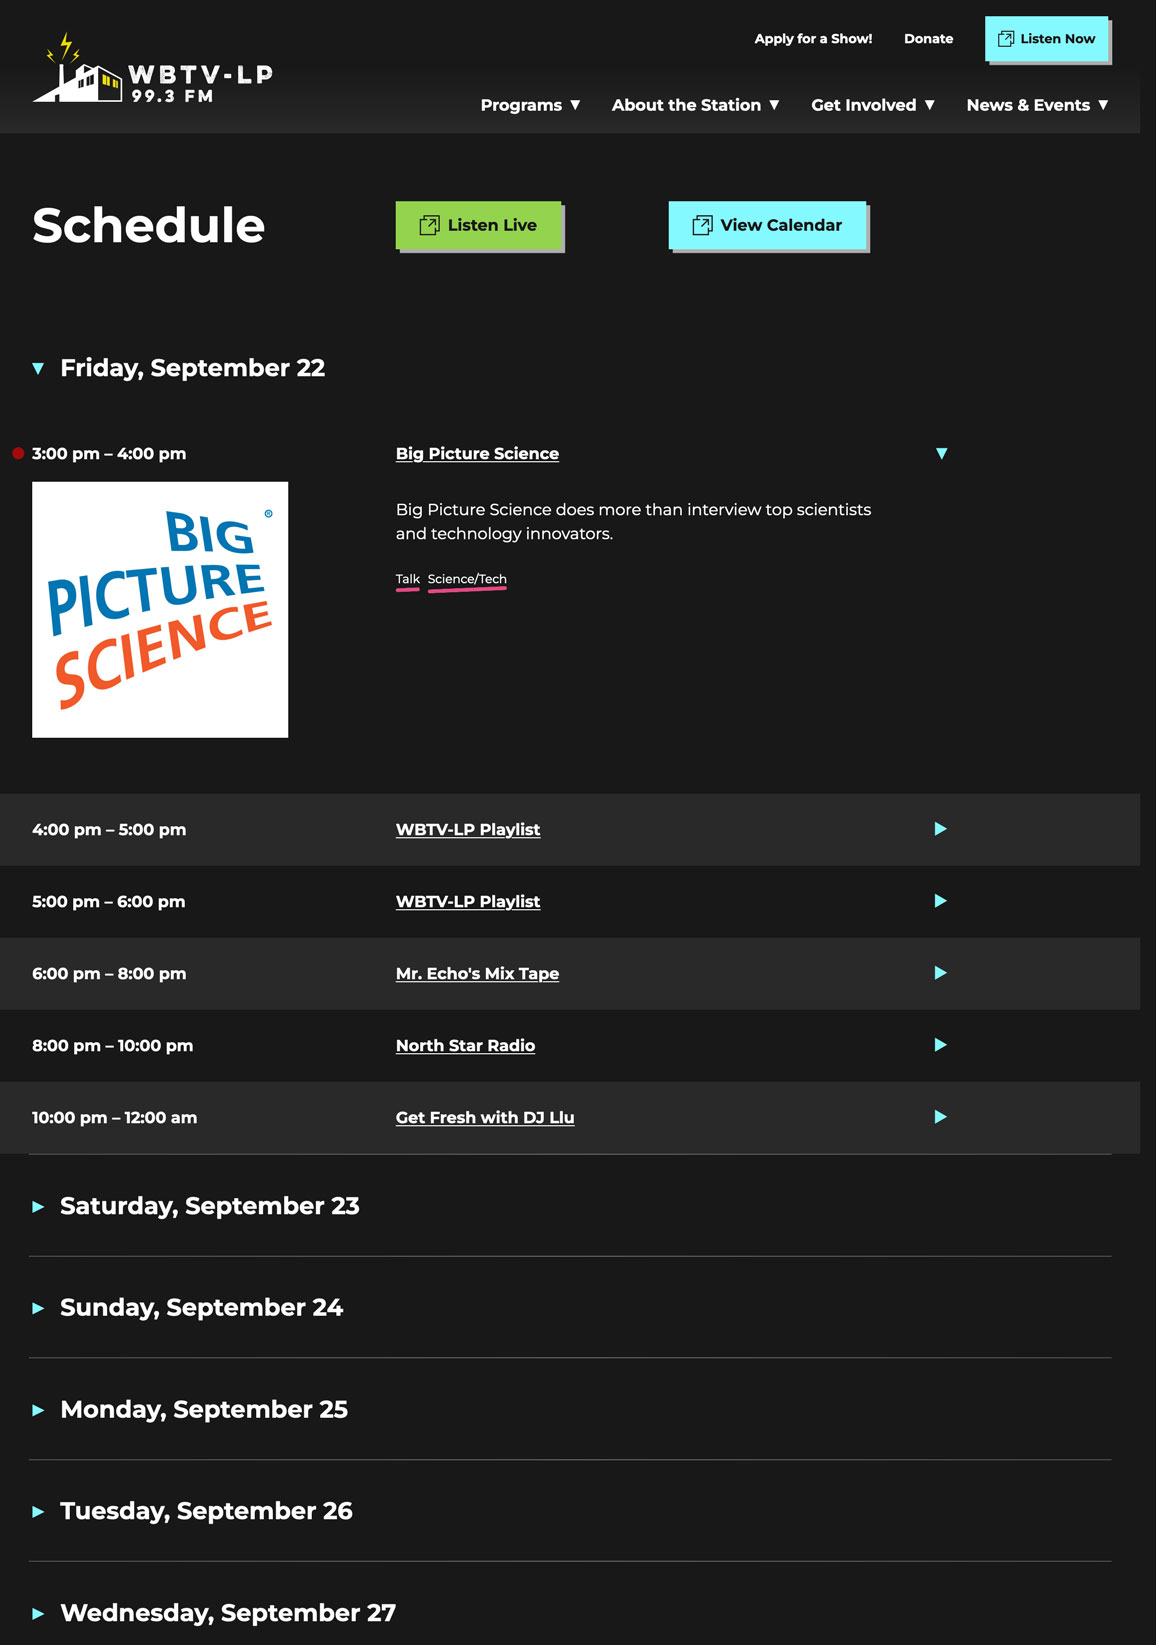 WBTV-LP Schedule page. A list of days with the current day expanded to show of a list of the day's programs and times.